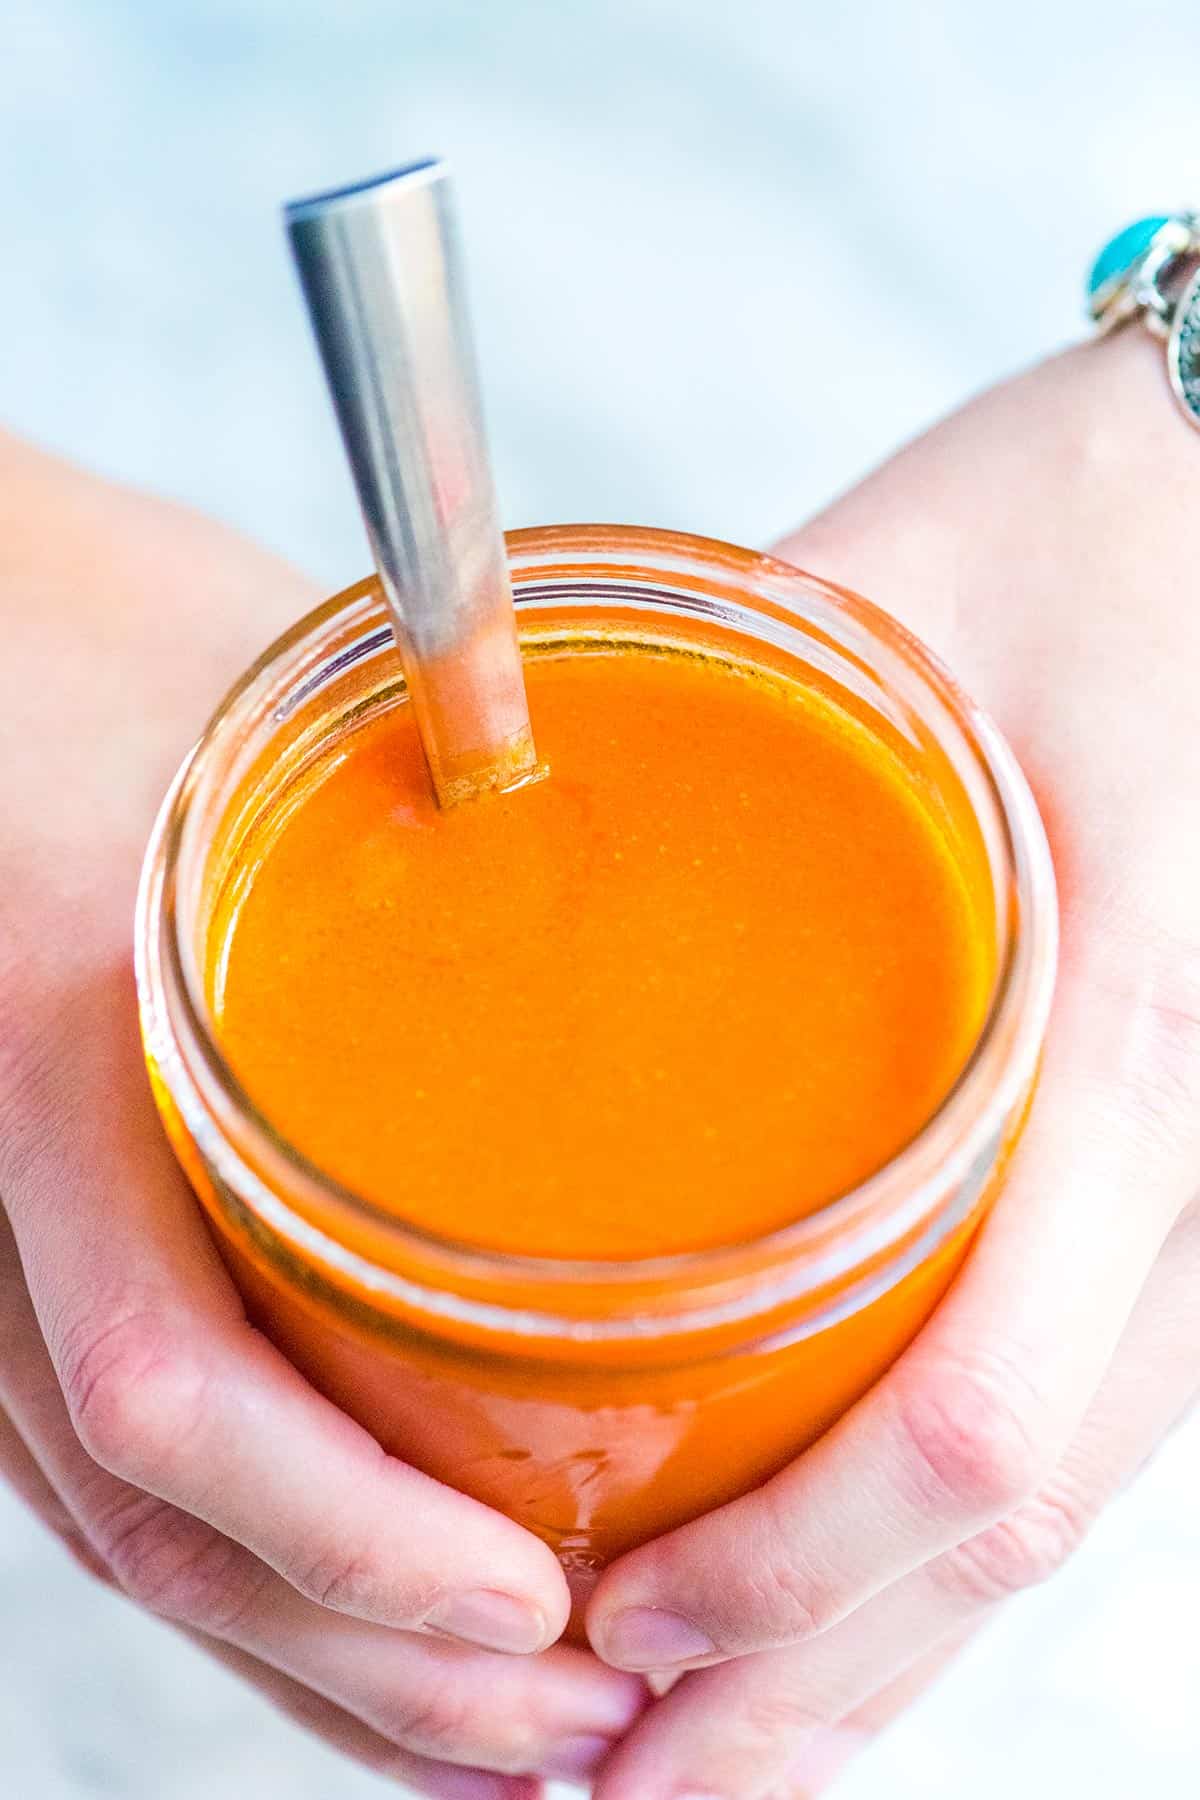 How to make homemade buffalo wing sauce with only three ingredients. Swap the store-bought bottles for homemade. You can even keep up to a month in the fridge.